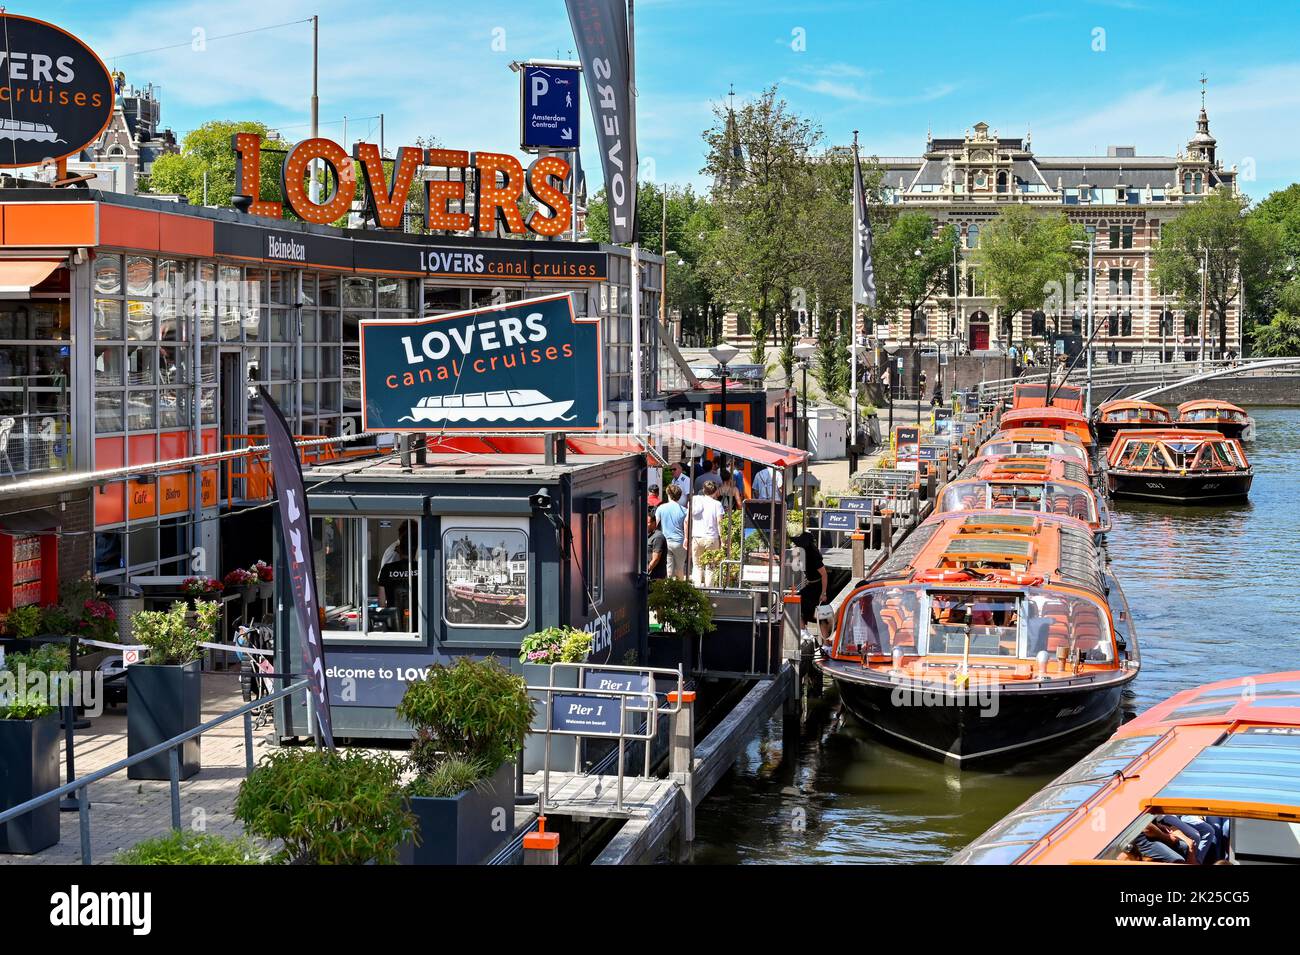 Amsterdam, Netherlands - August 2022: Tourist sightseeing canal boats moored at one of the piers in the city centre Stock Photo